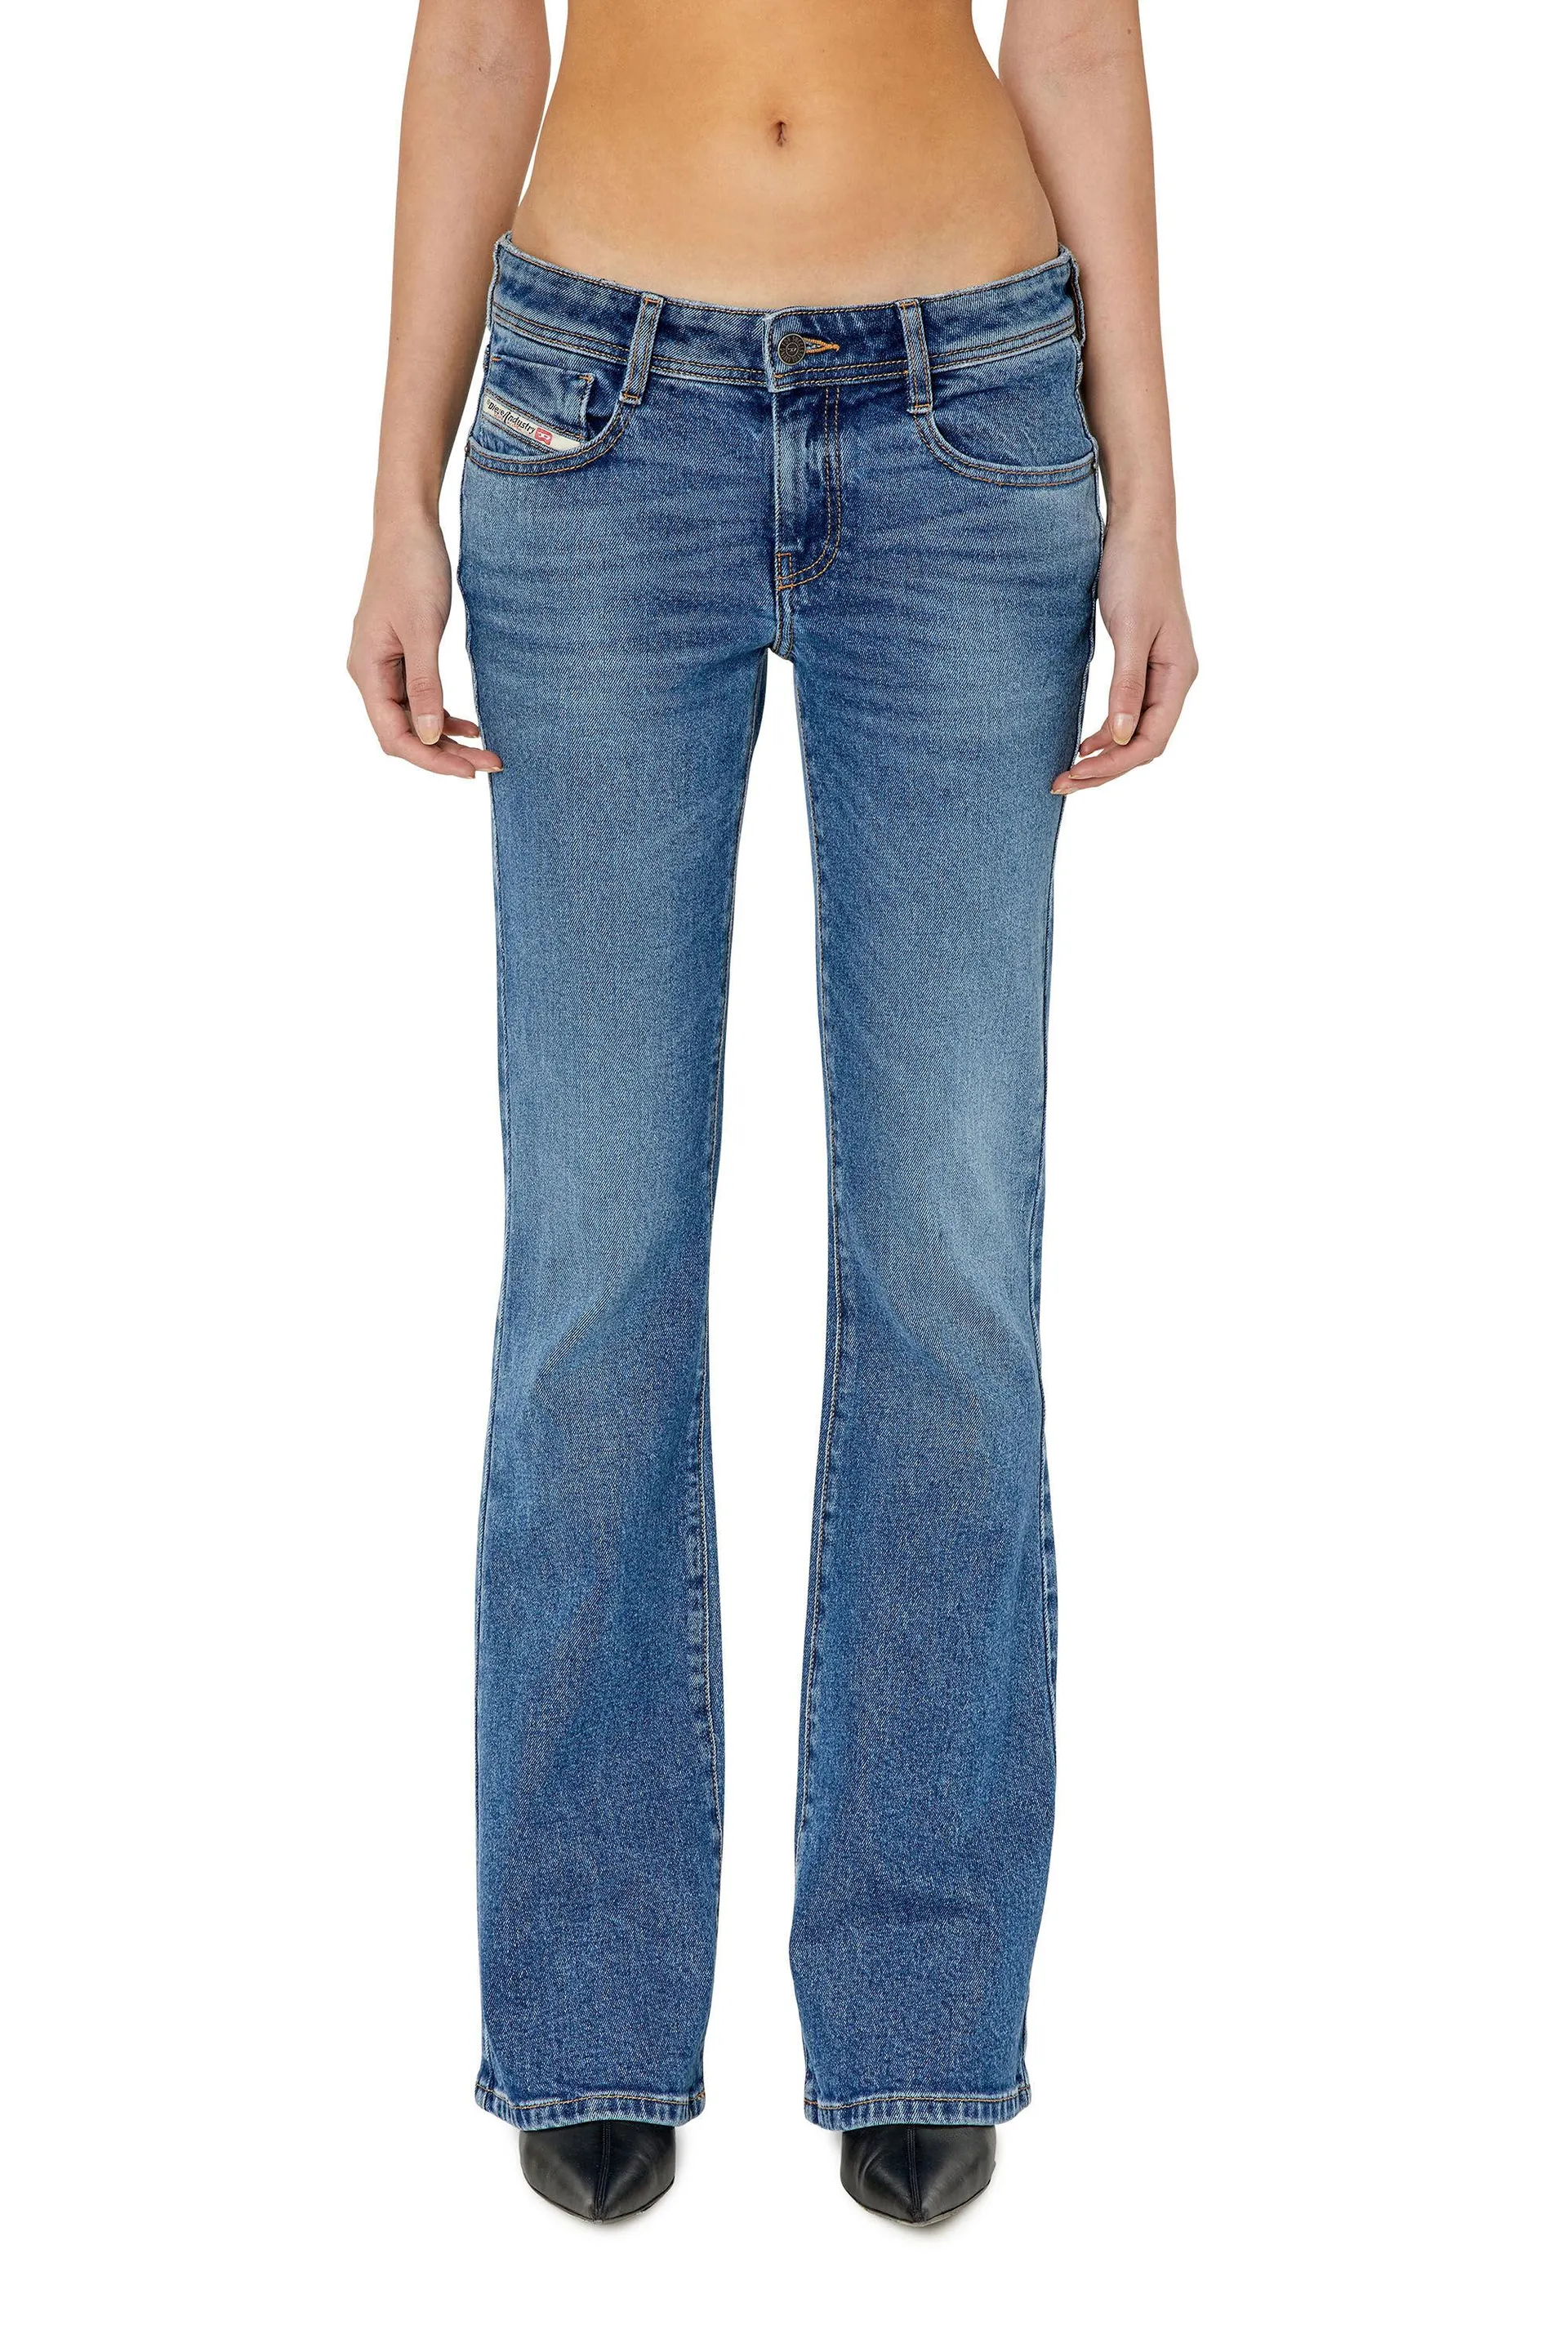 1969 d-ebbey 0nfaj bootcut and flare jeans